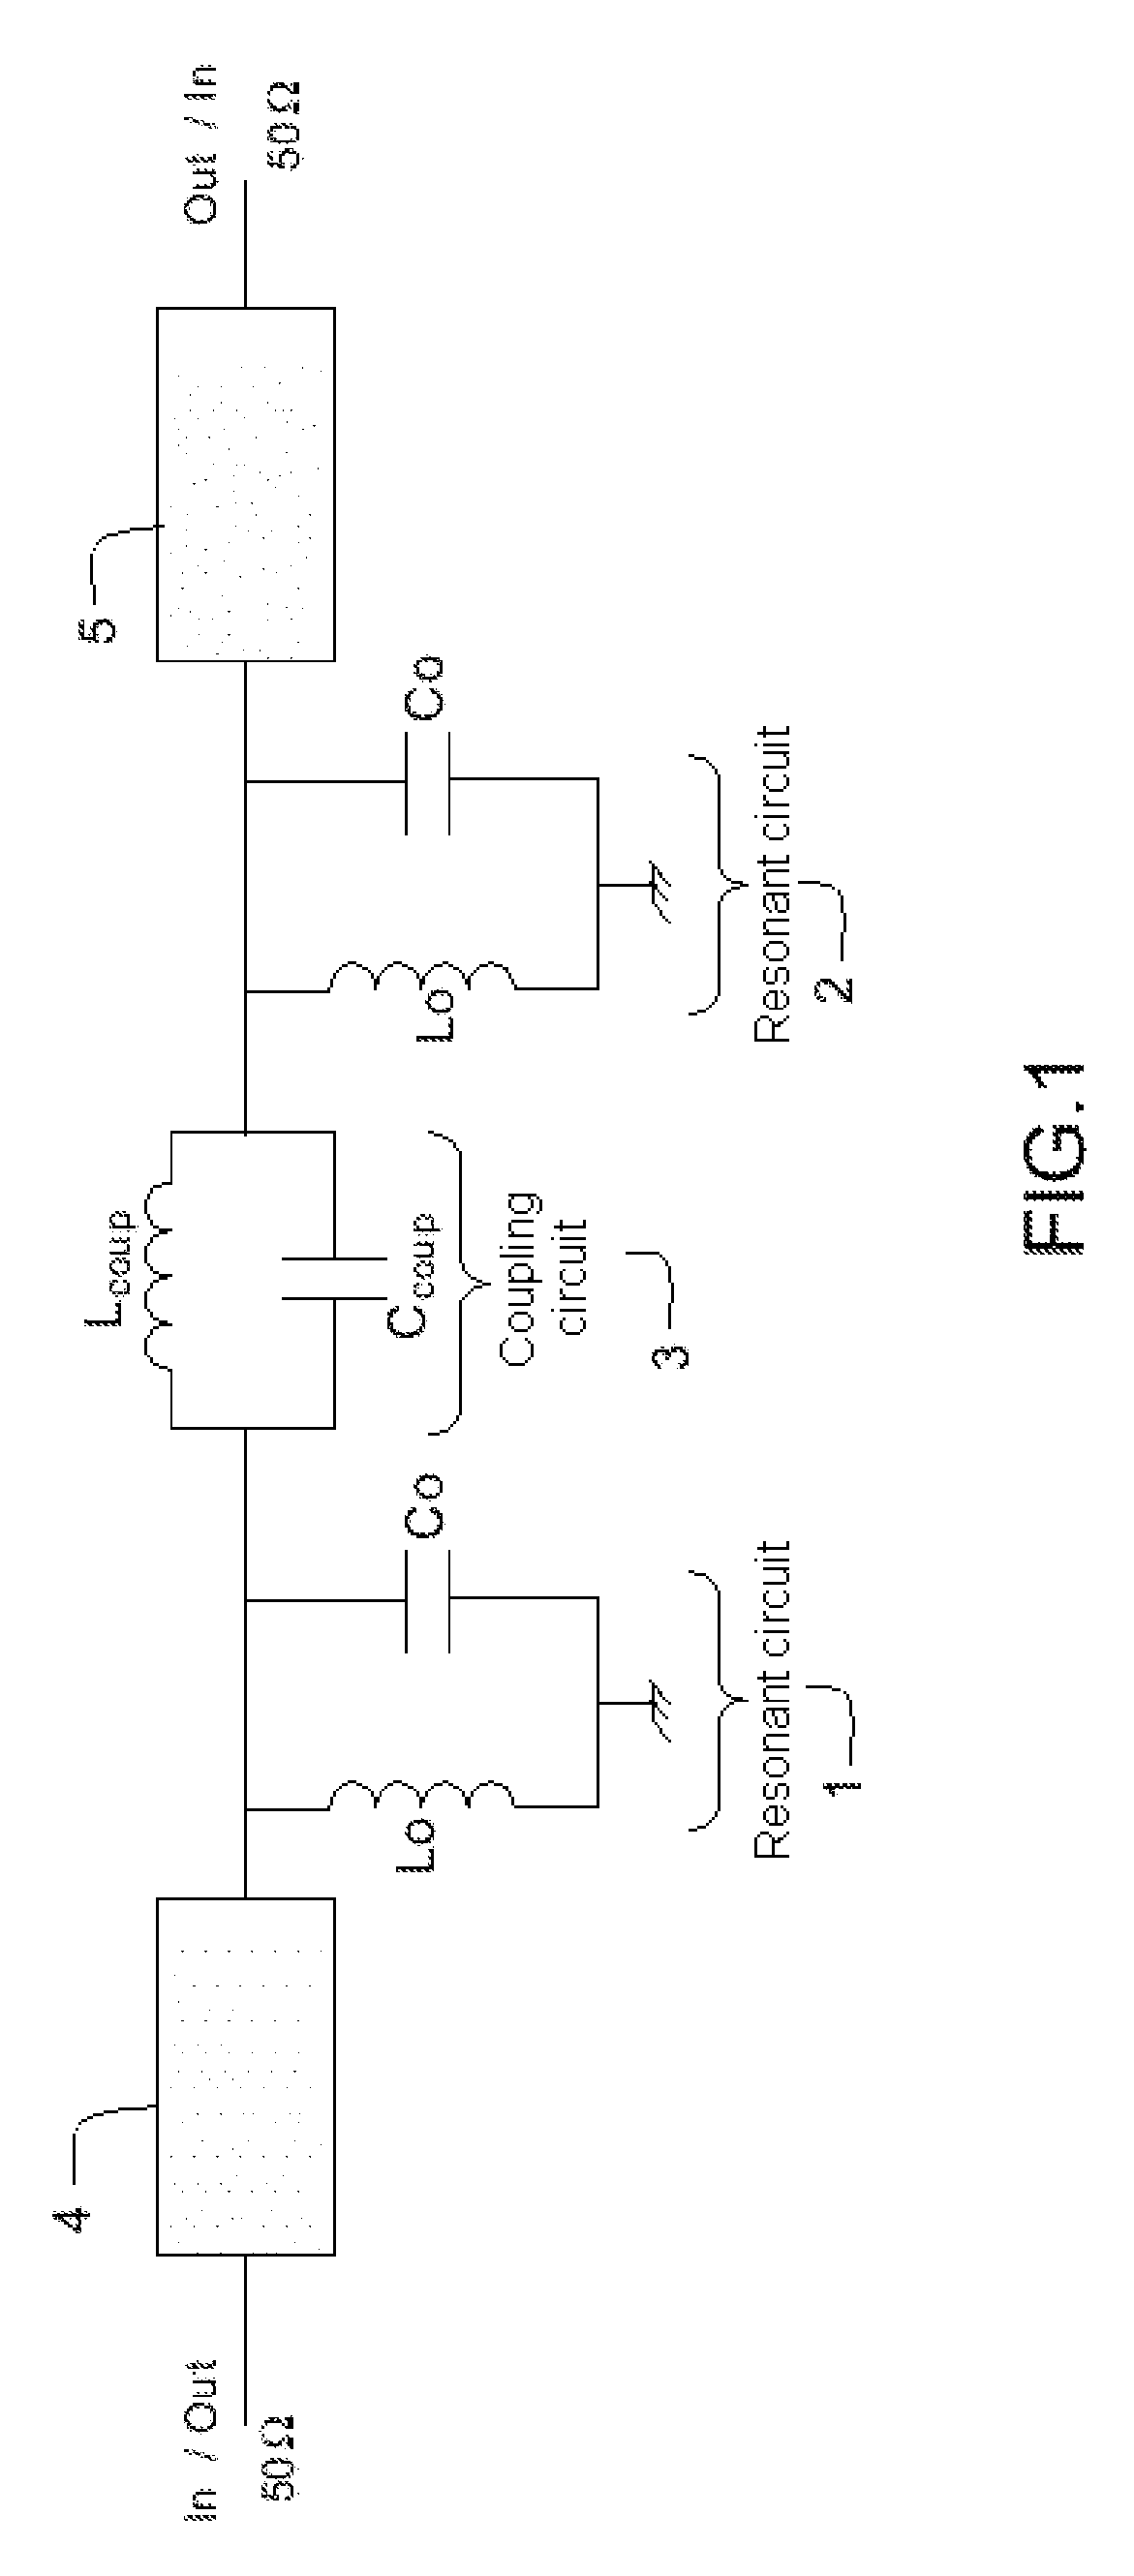 Filter that is variable by means of a capacitor that is switched using MEMS components